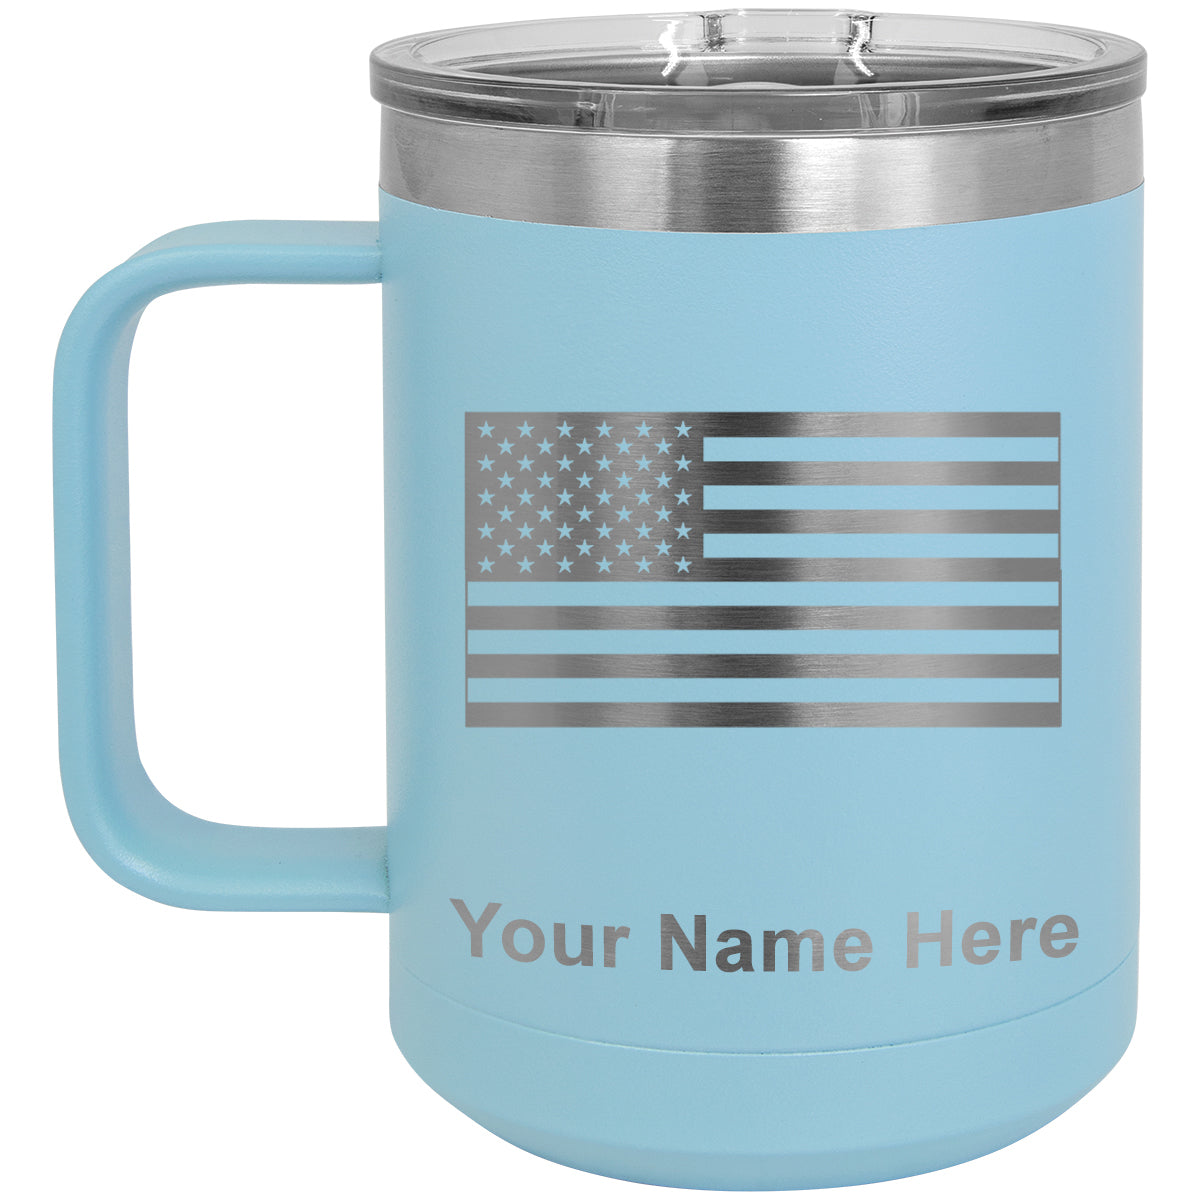 15oz Vacuum Insulated Coffee Mug, Flag of the United States, Personalized Engraving Included